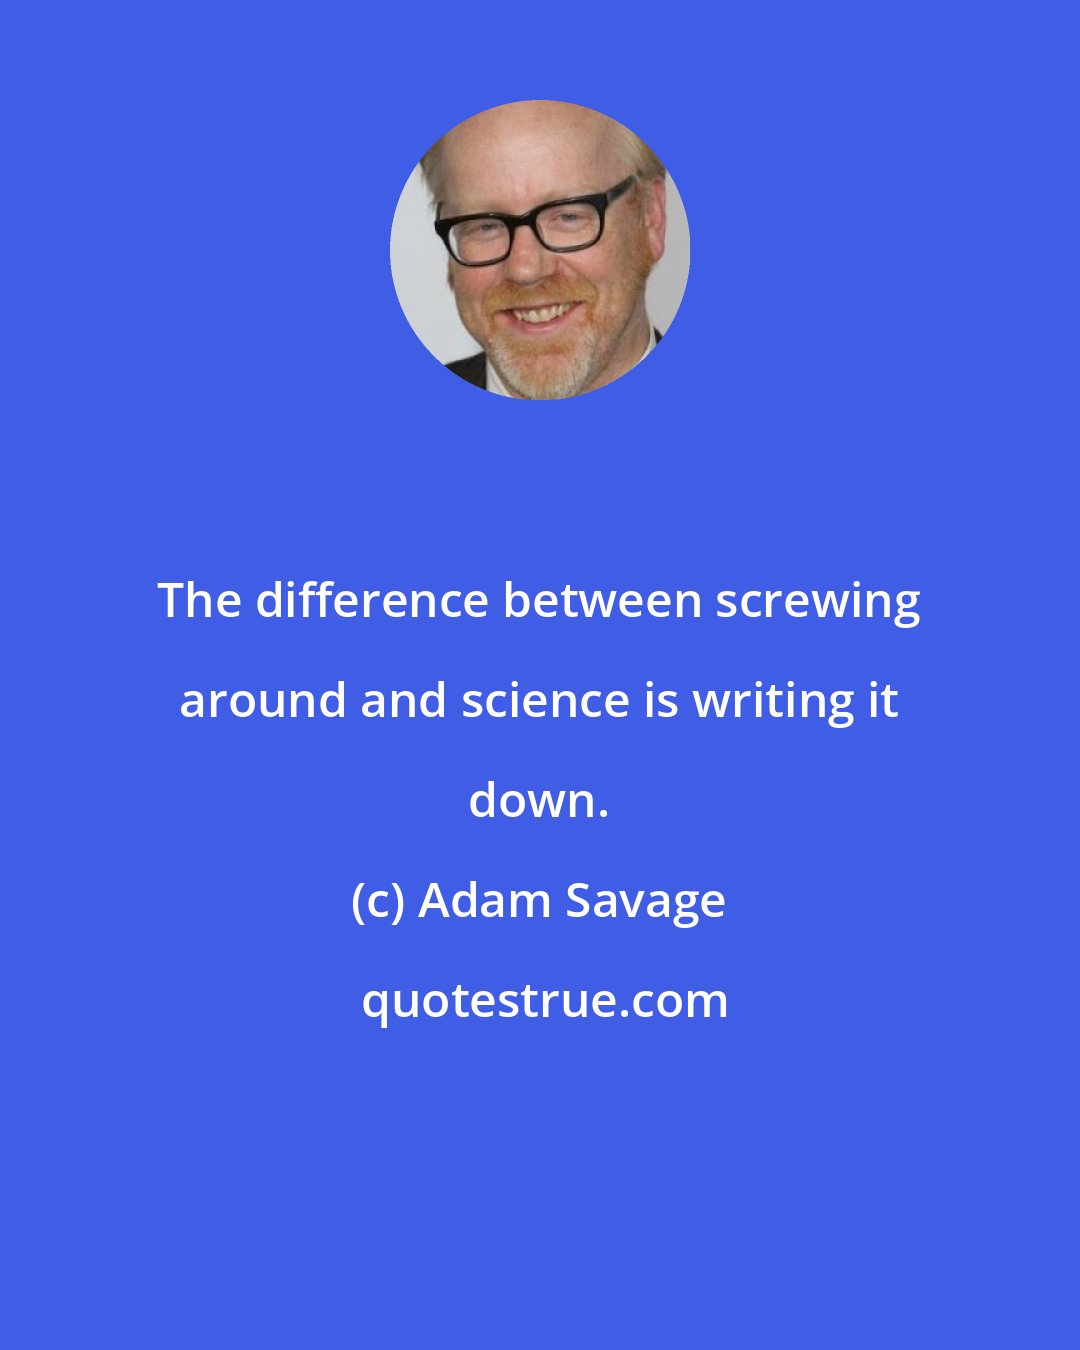 Adam Savage: The difference between screwing around and science is writing it down.